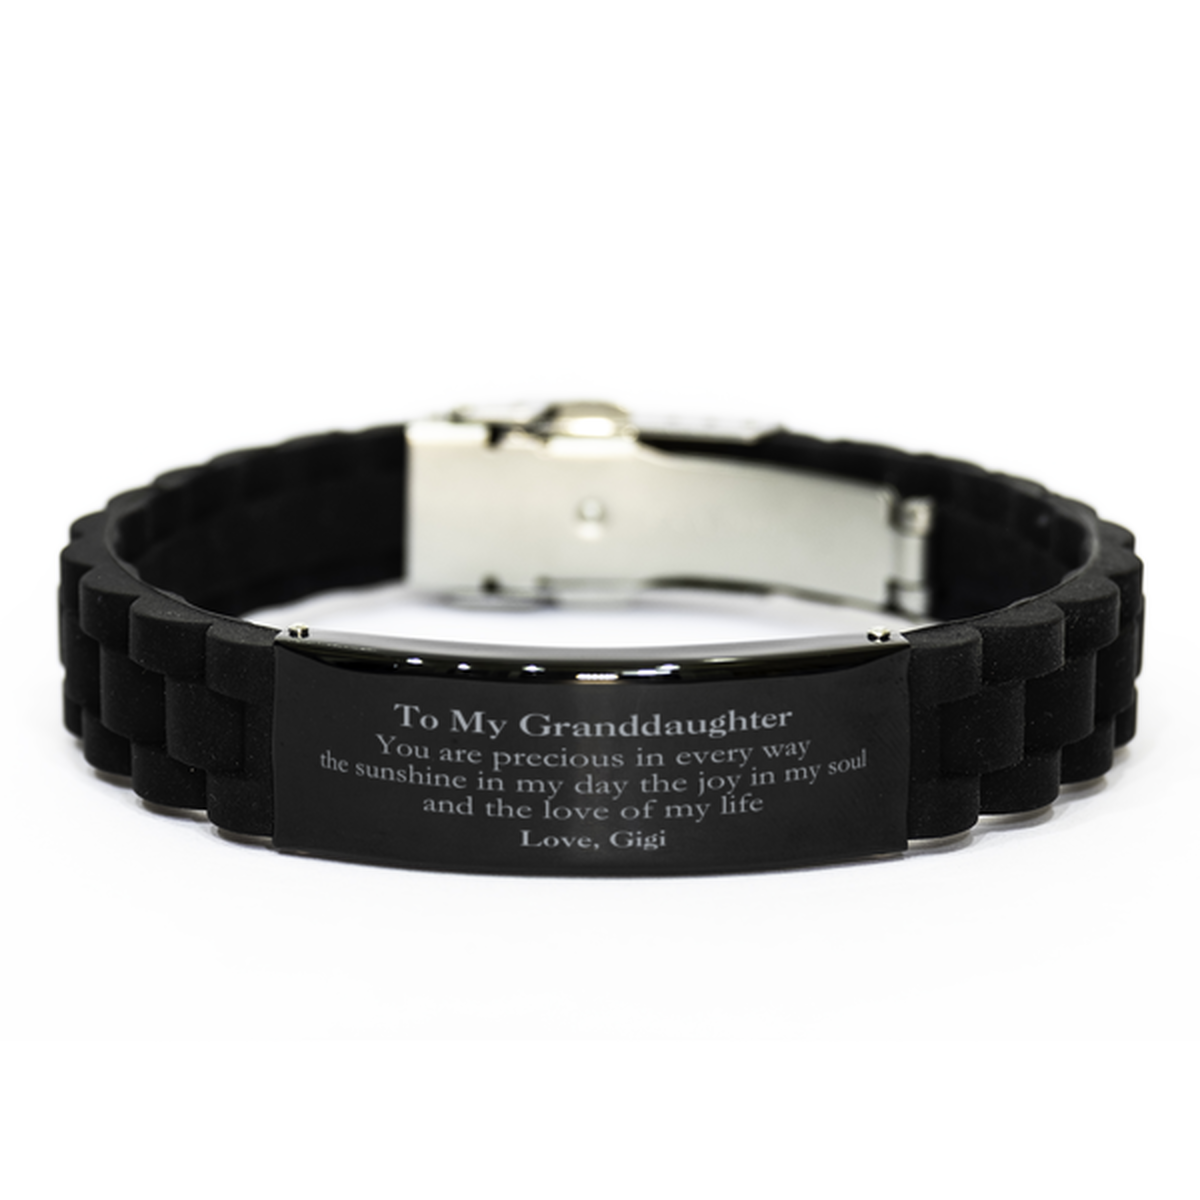 Graduation Gifts for Granddaughter Black Glidelock Clasp Bracelet Present from Gigi, Christmas Granddaughter Birthday Gifts Granddaughter You are precious in every way the sunshine in my day. Love, Gigi